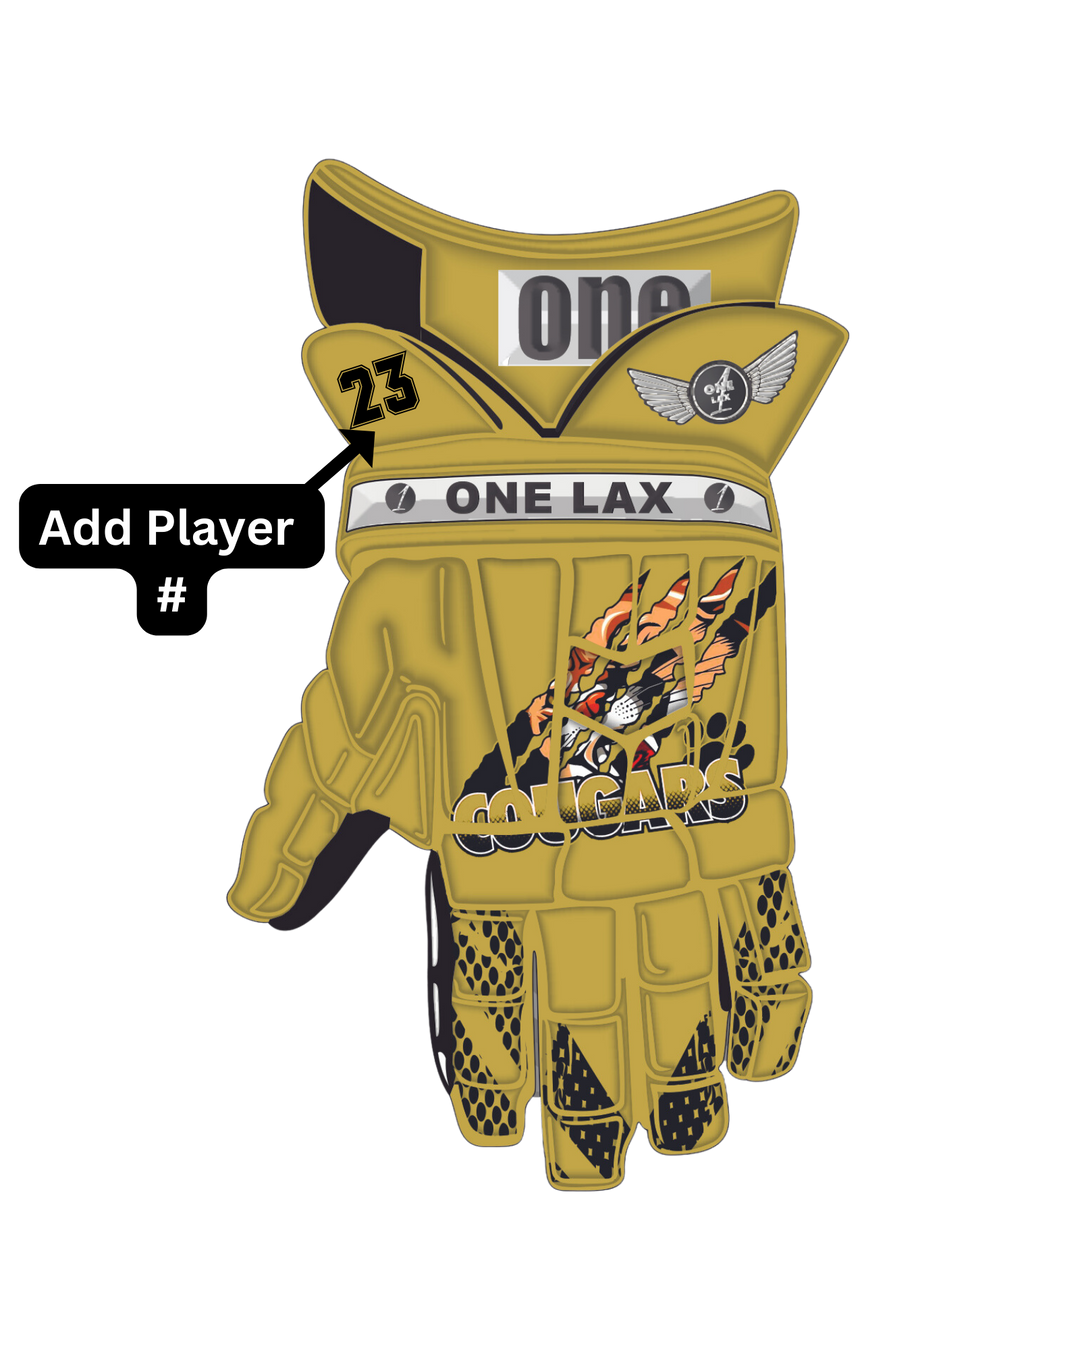 Carberry Cougars Team | HYBRID Box & Field Lacrosse Gloves - One Lax